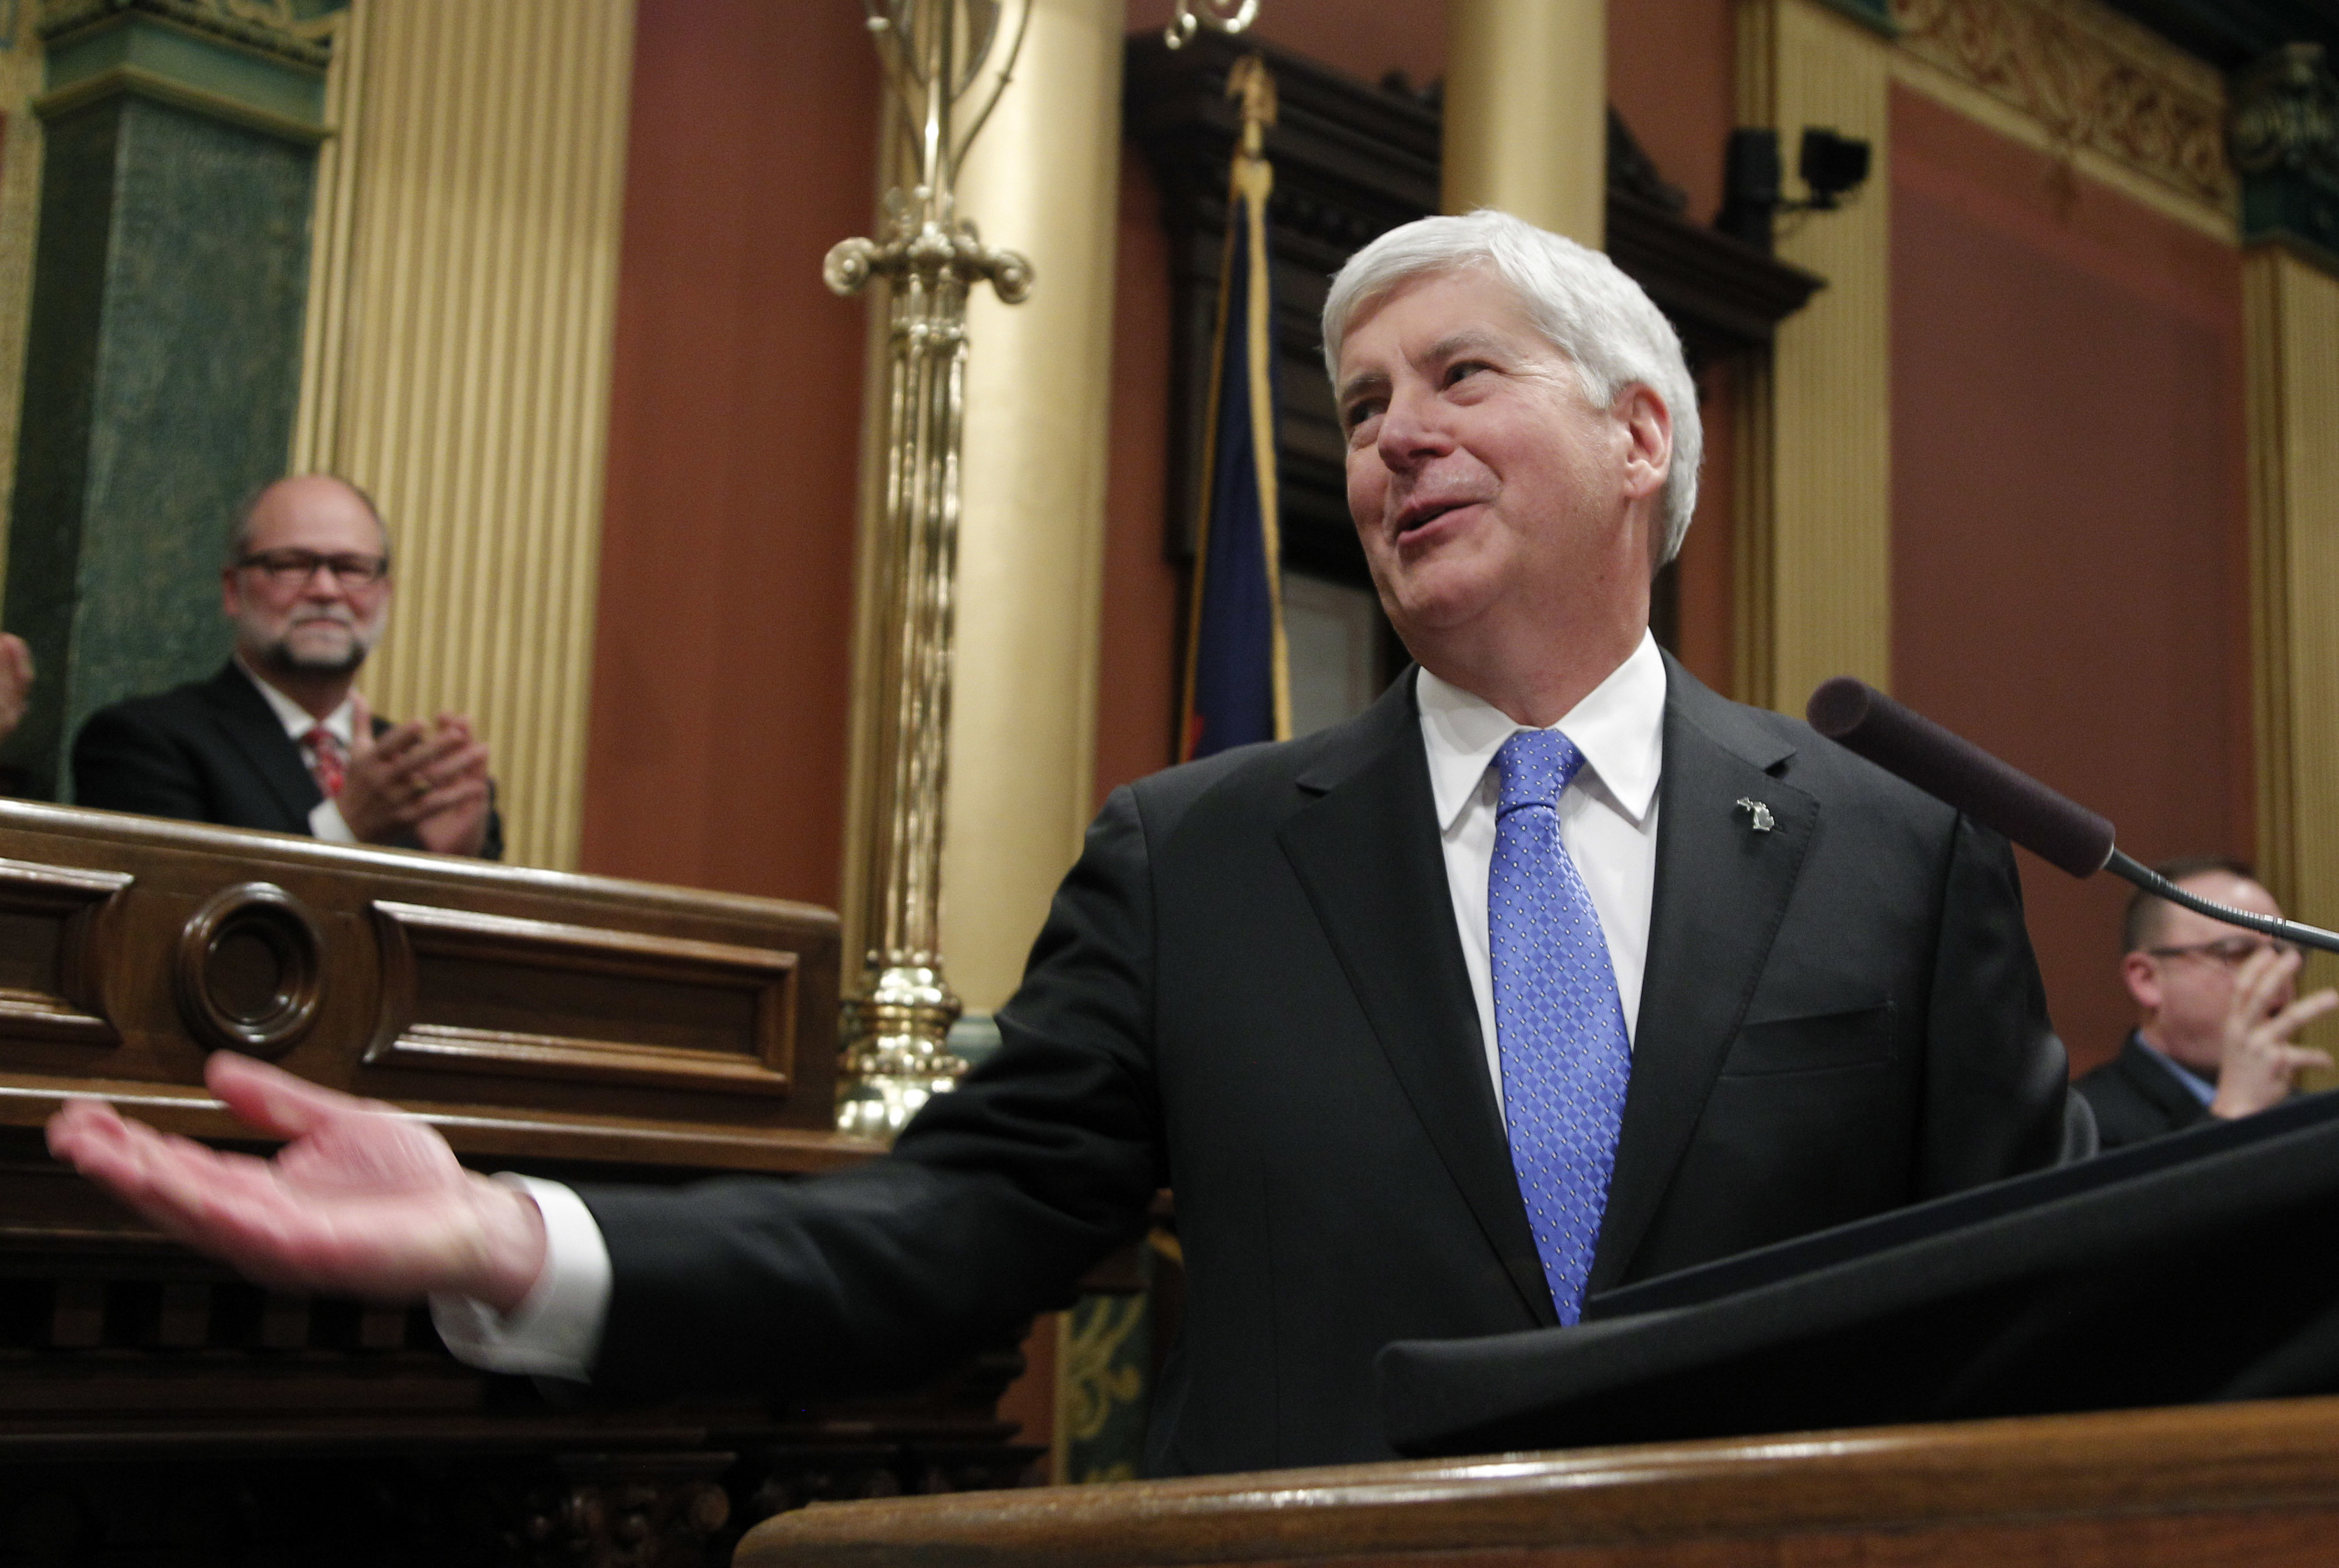 Michigan governor signs bills to gut wage, sick time laws